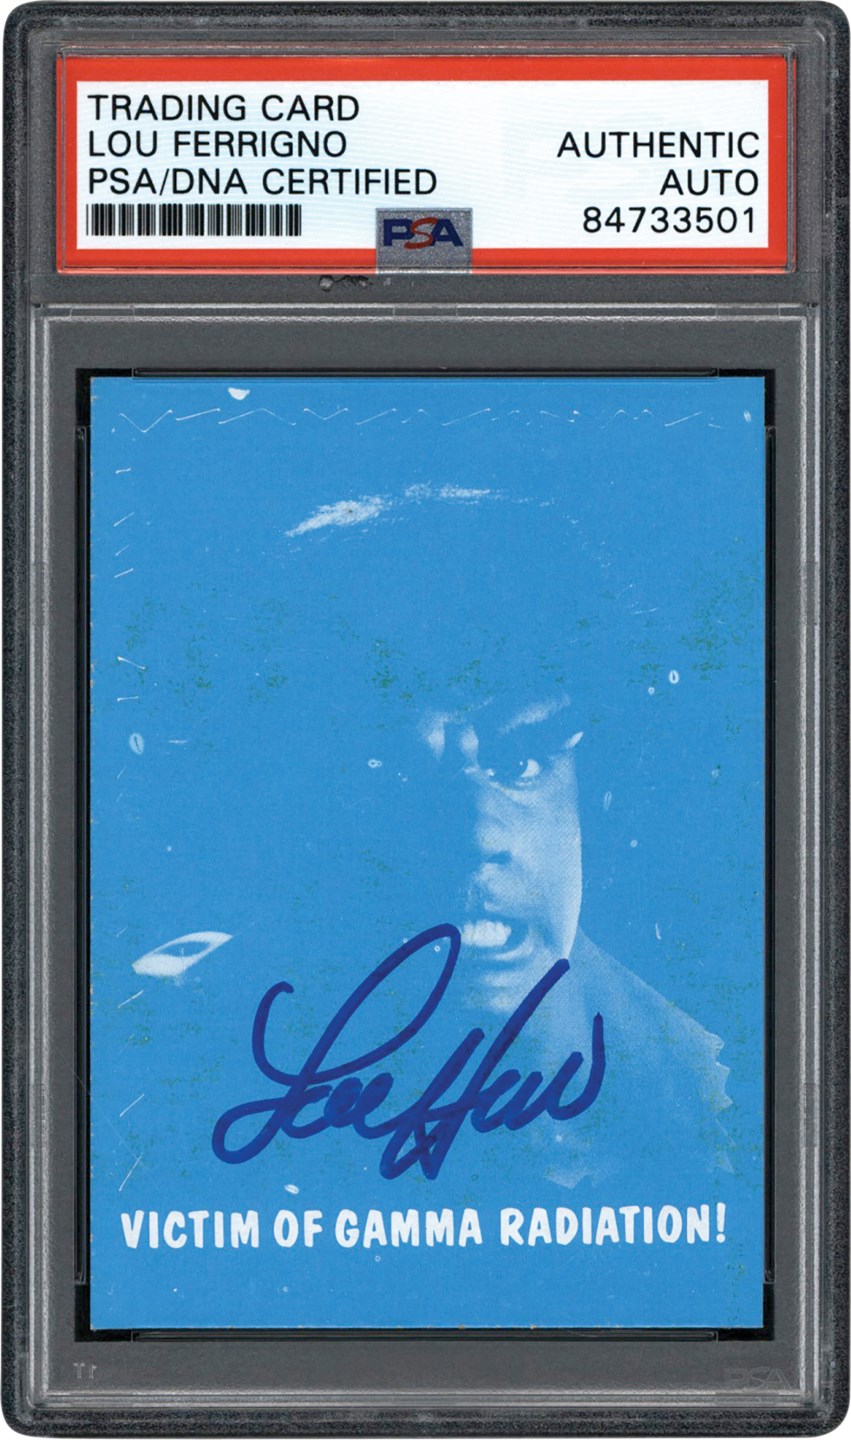 Non-Sports Cards - 1979 Topps The Incredible Hulk #87 Original Color Separation Signed by Lou Ferrigno Topps Vault PSA/DNA Authentic Auto